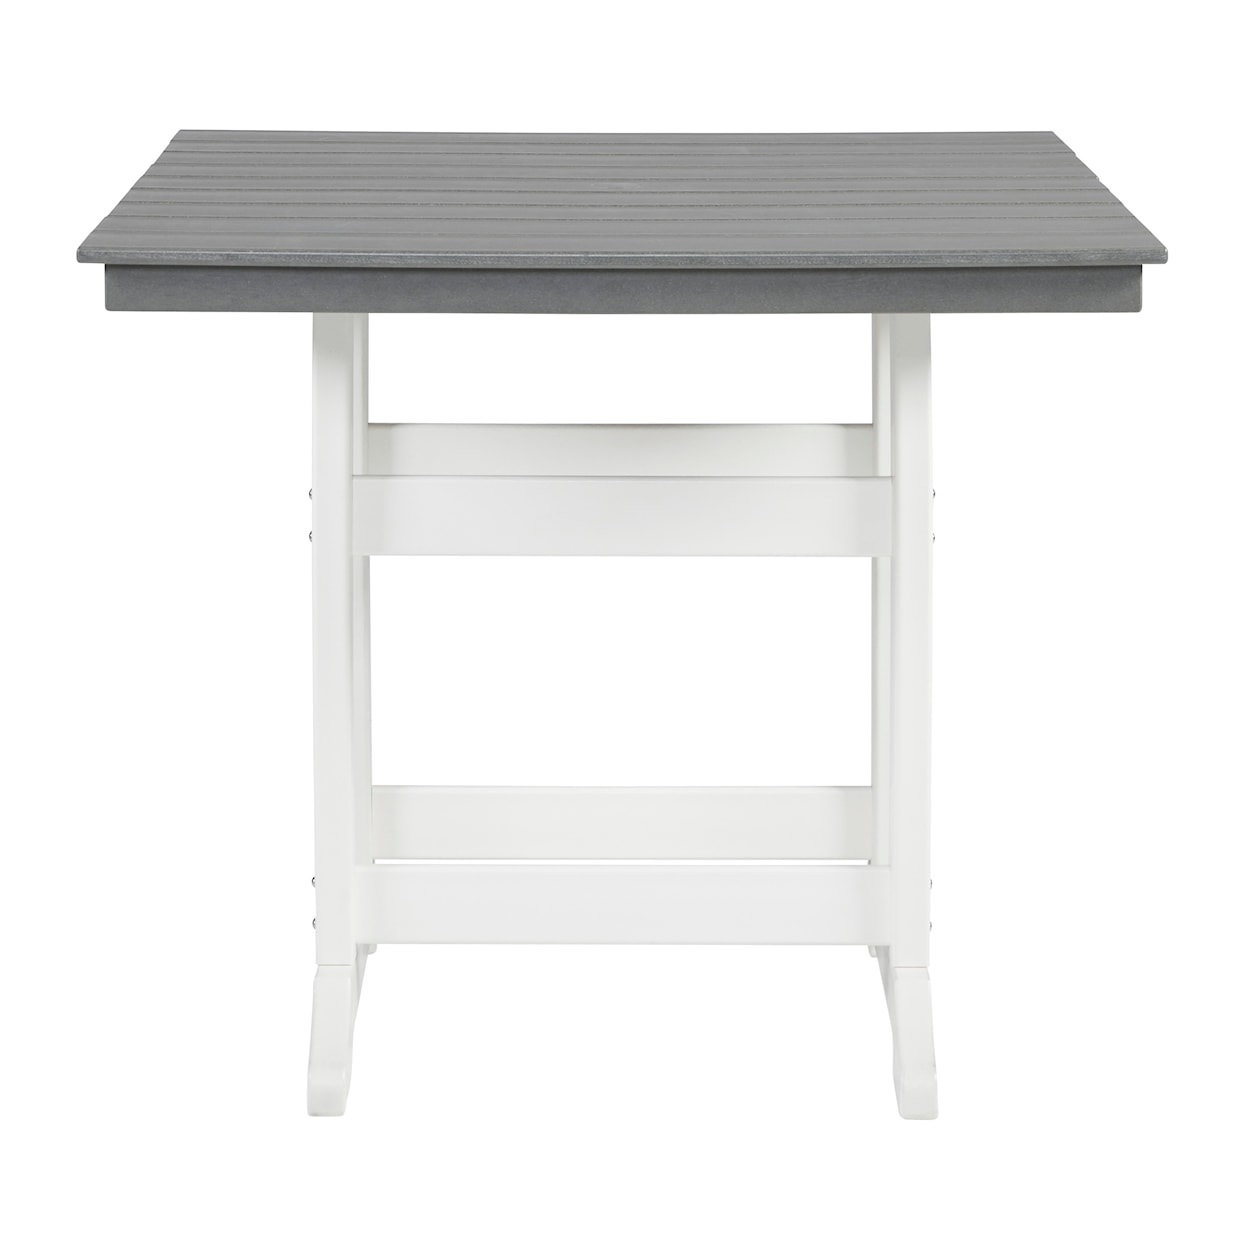 StyleLine Transville Outdoor Counter Height Dining Table